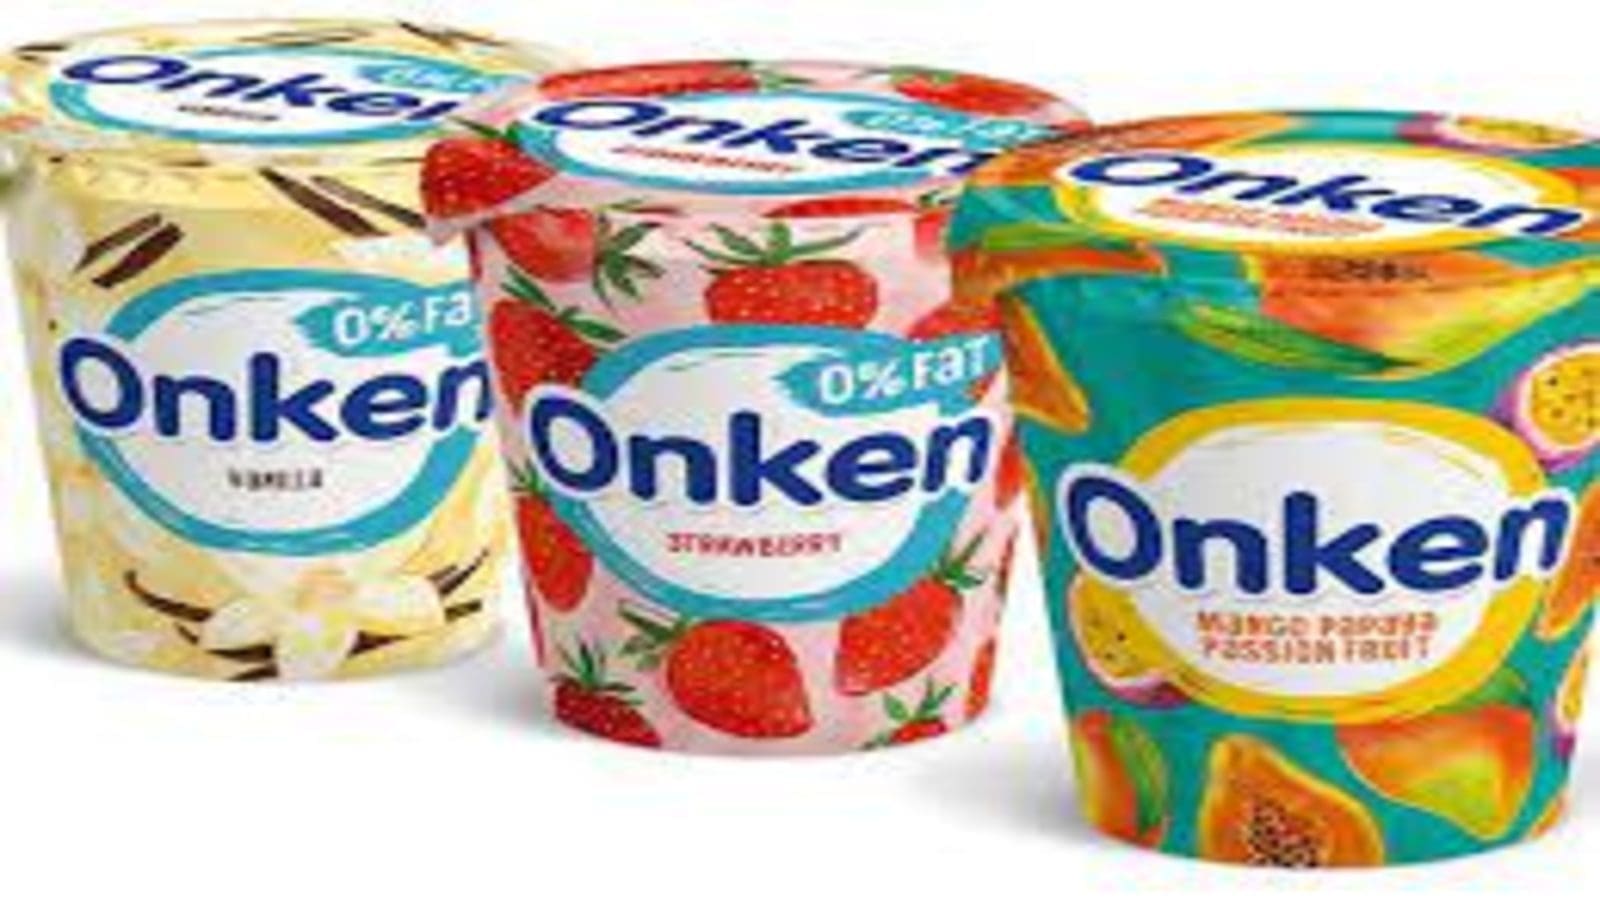 Emmi Group phases out distribution of Onken brand in German Market